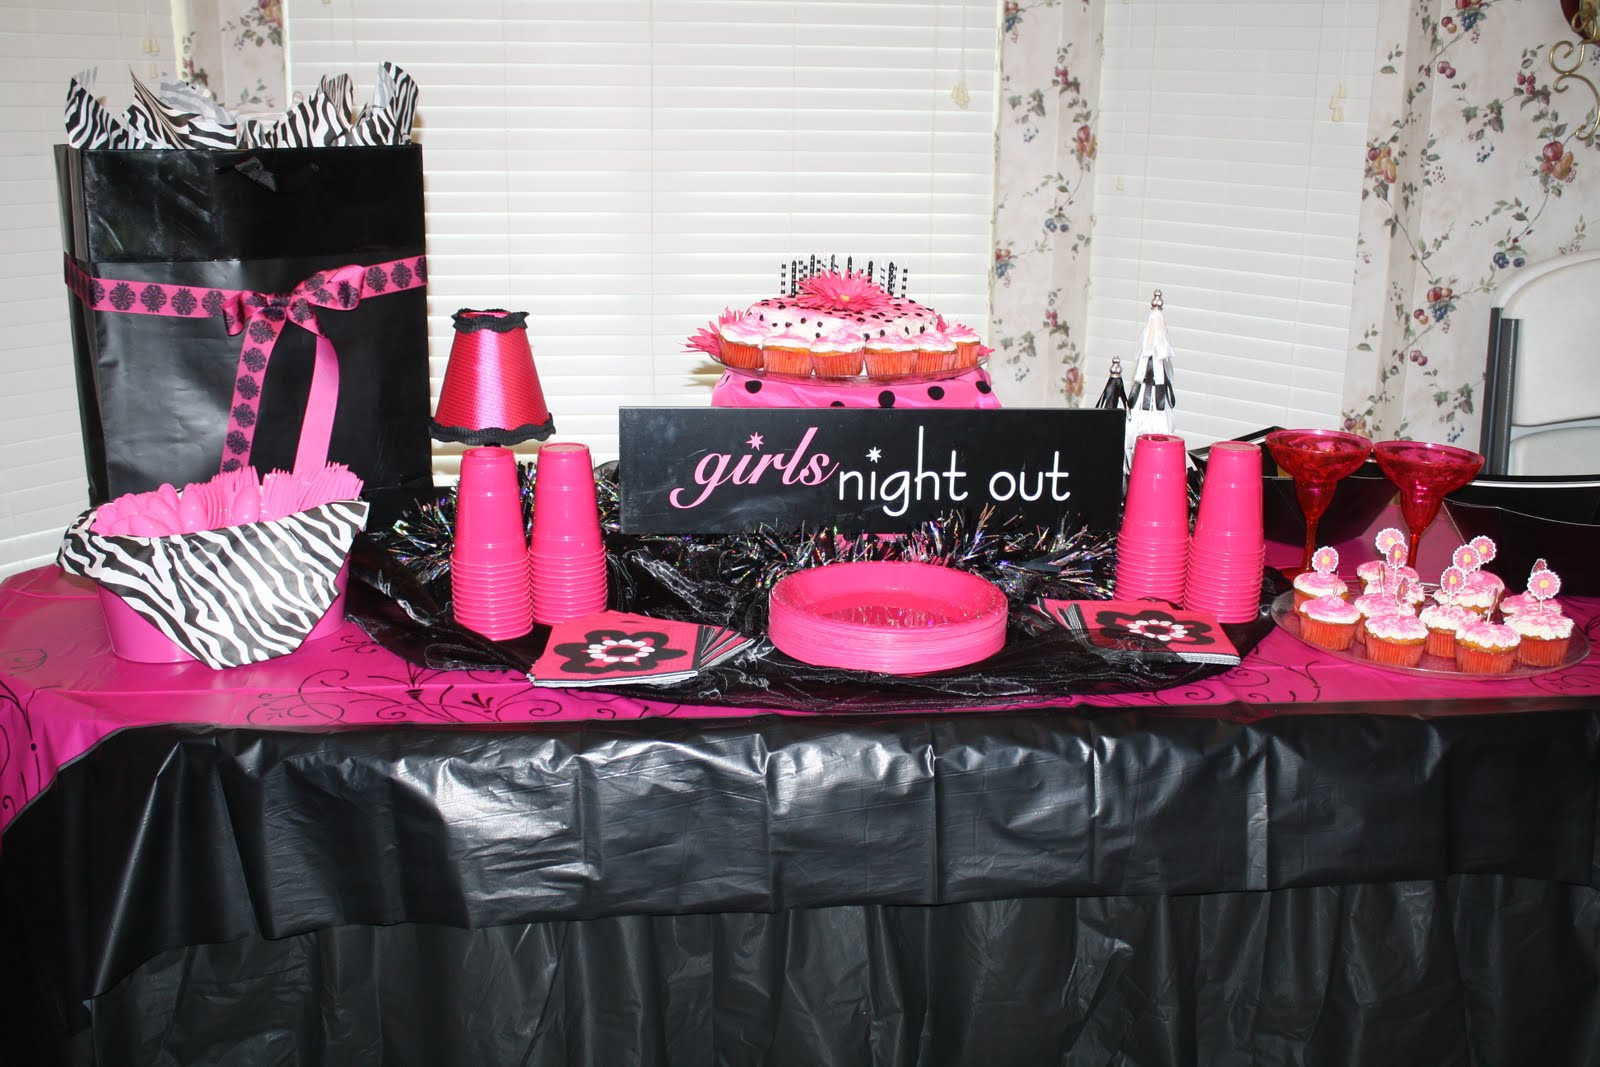 The Best Ideas for 17th Birthday Party Ideas - Home, Family, Style and